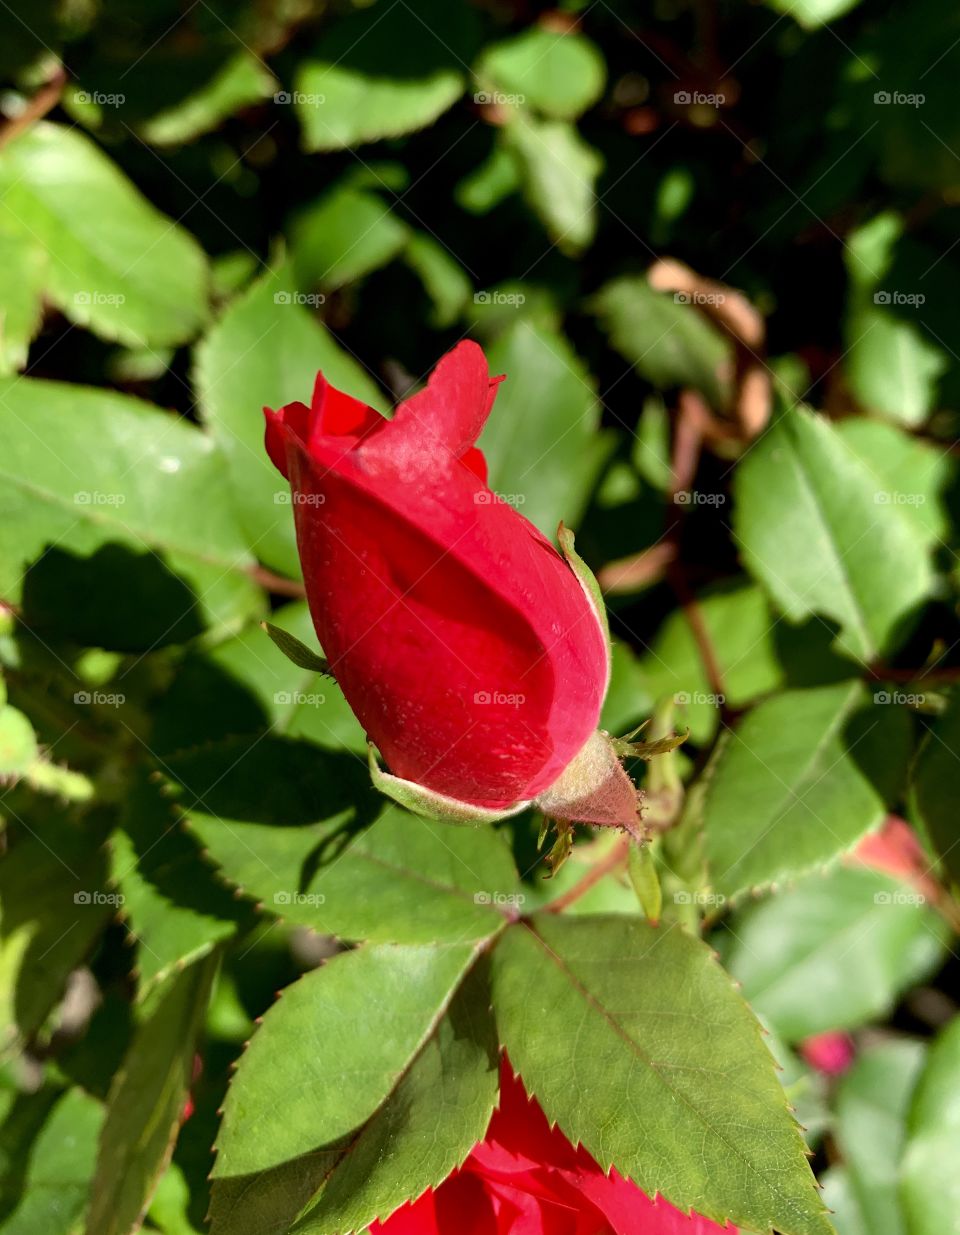 A red rose that is about to bloom